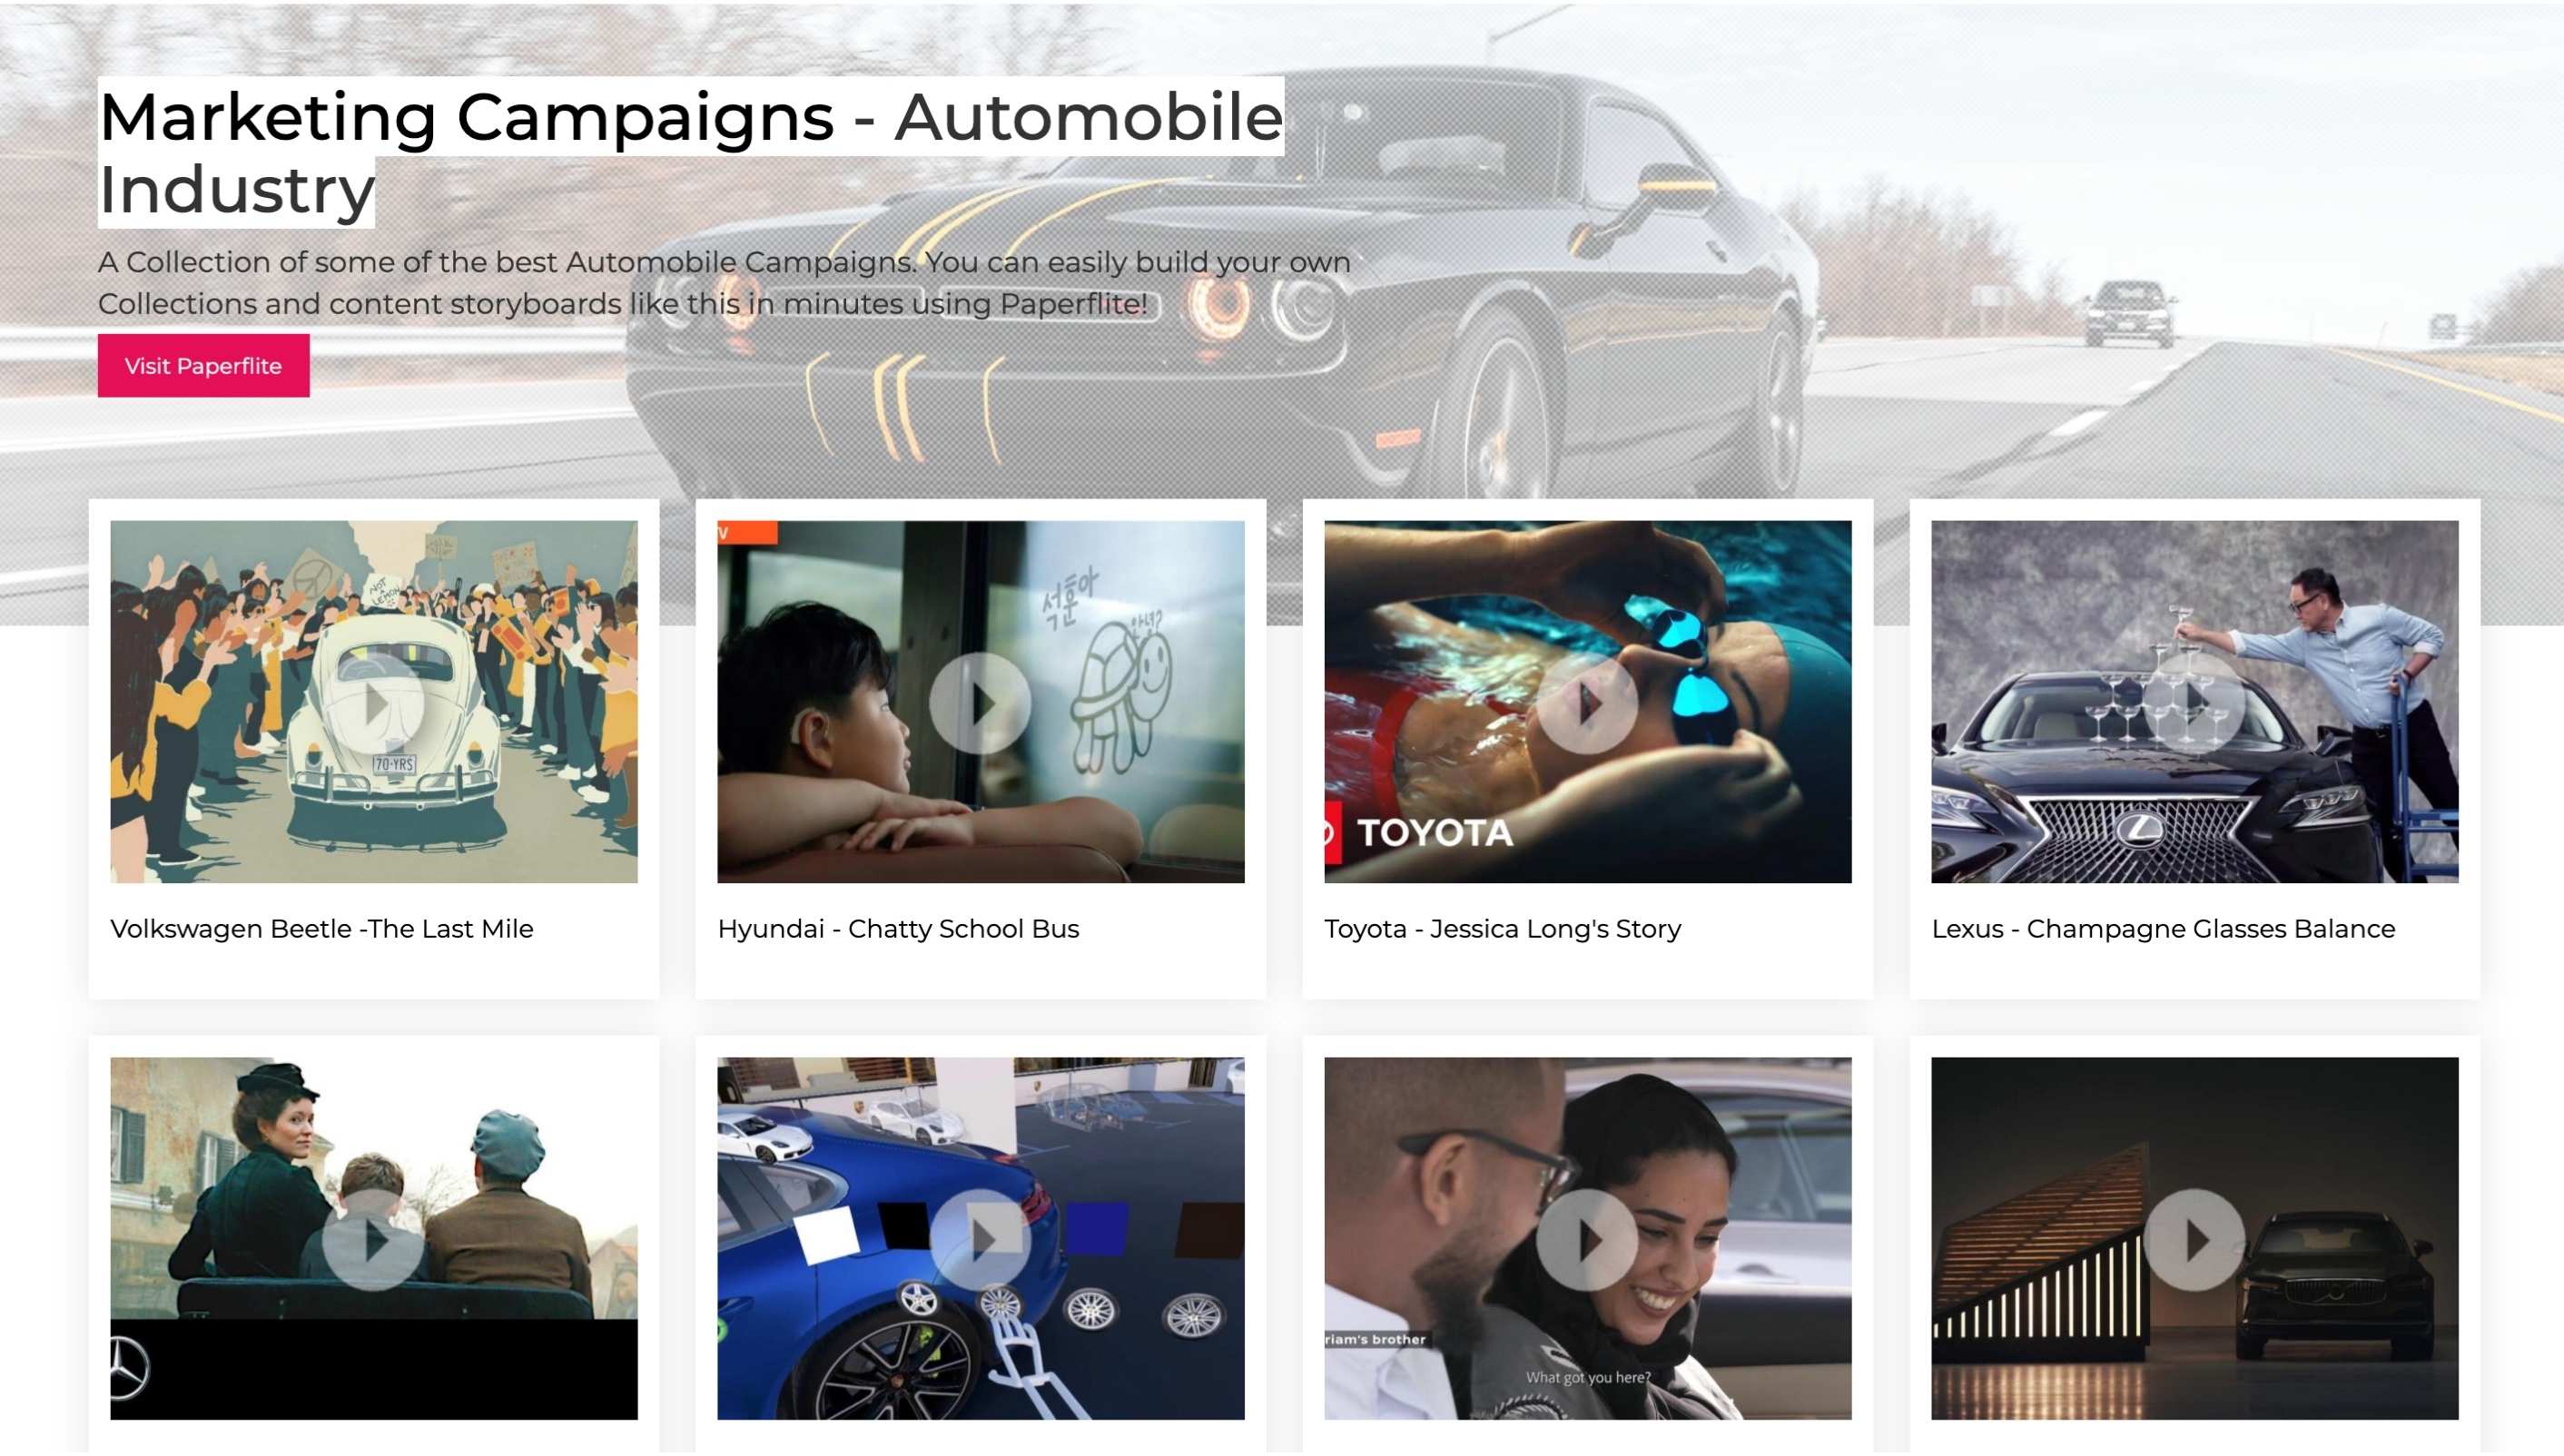 A Paperflite collection of Marketing Campaign examples in the Automobile industry